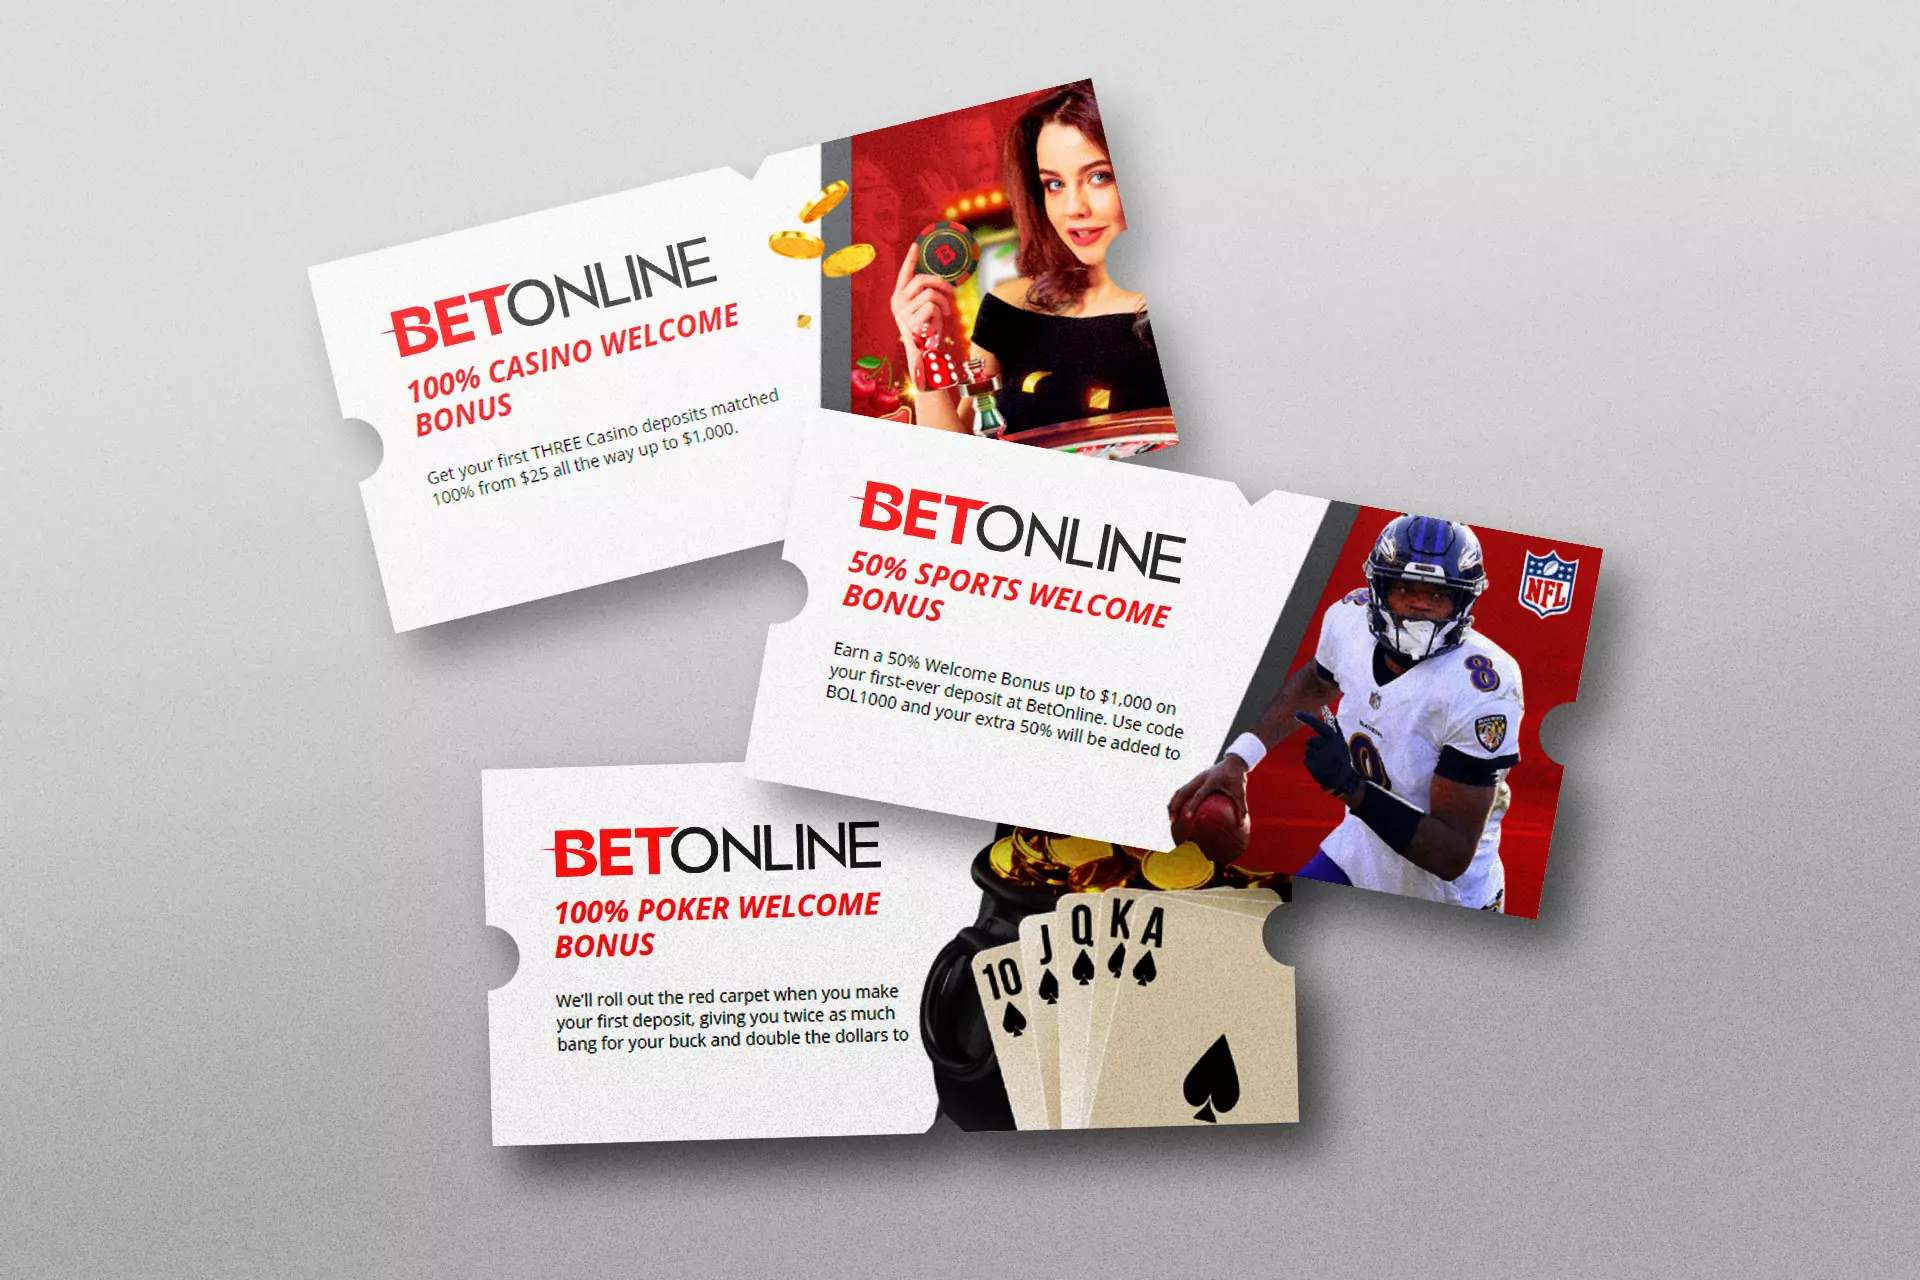 If you are a new user on BetOnline, you can get a welcome bonus for betting or playing casino games.